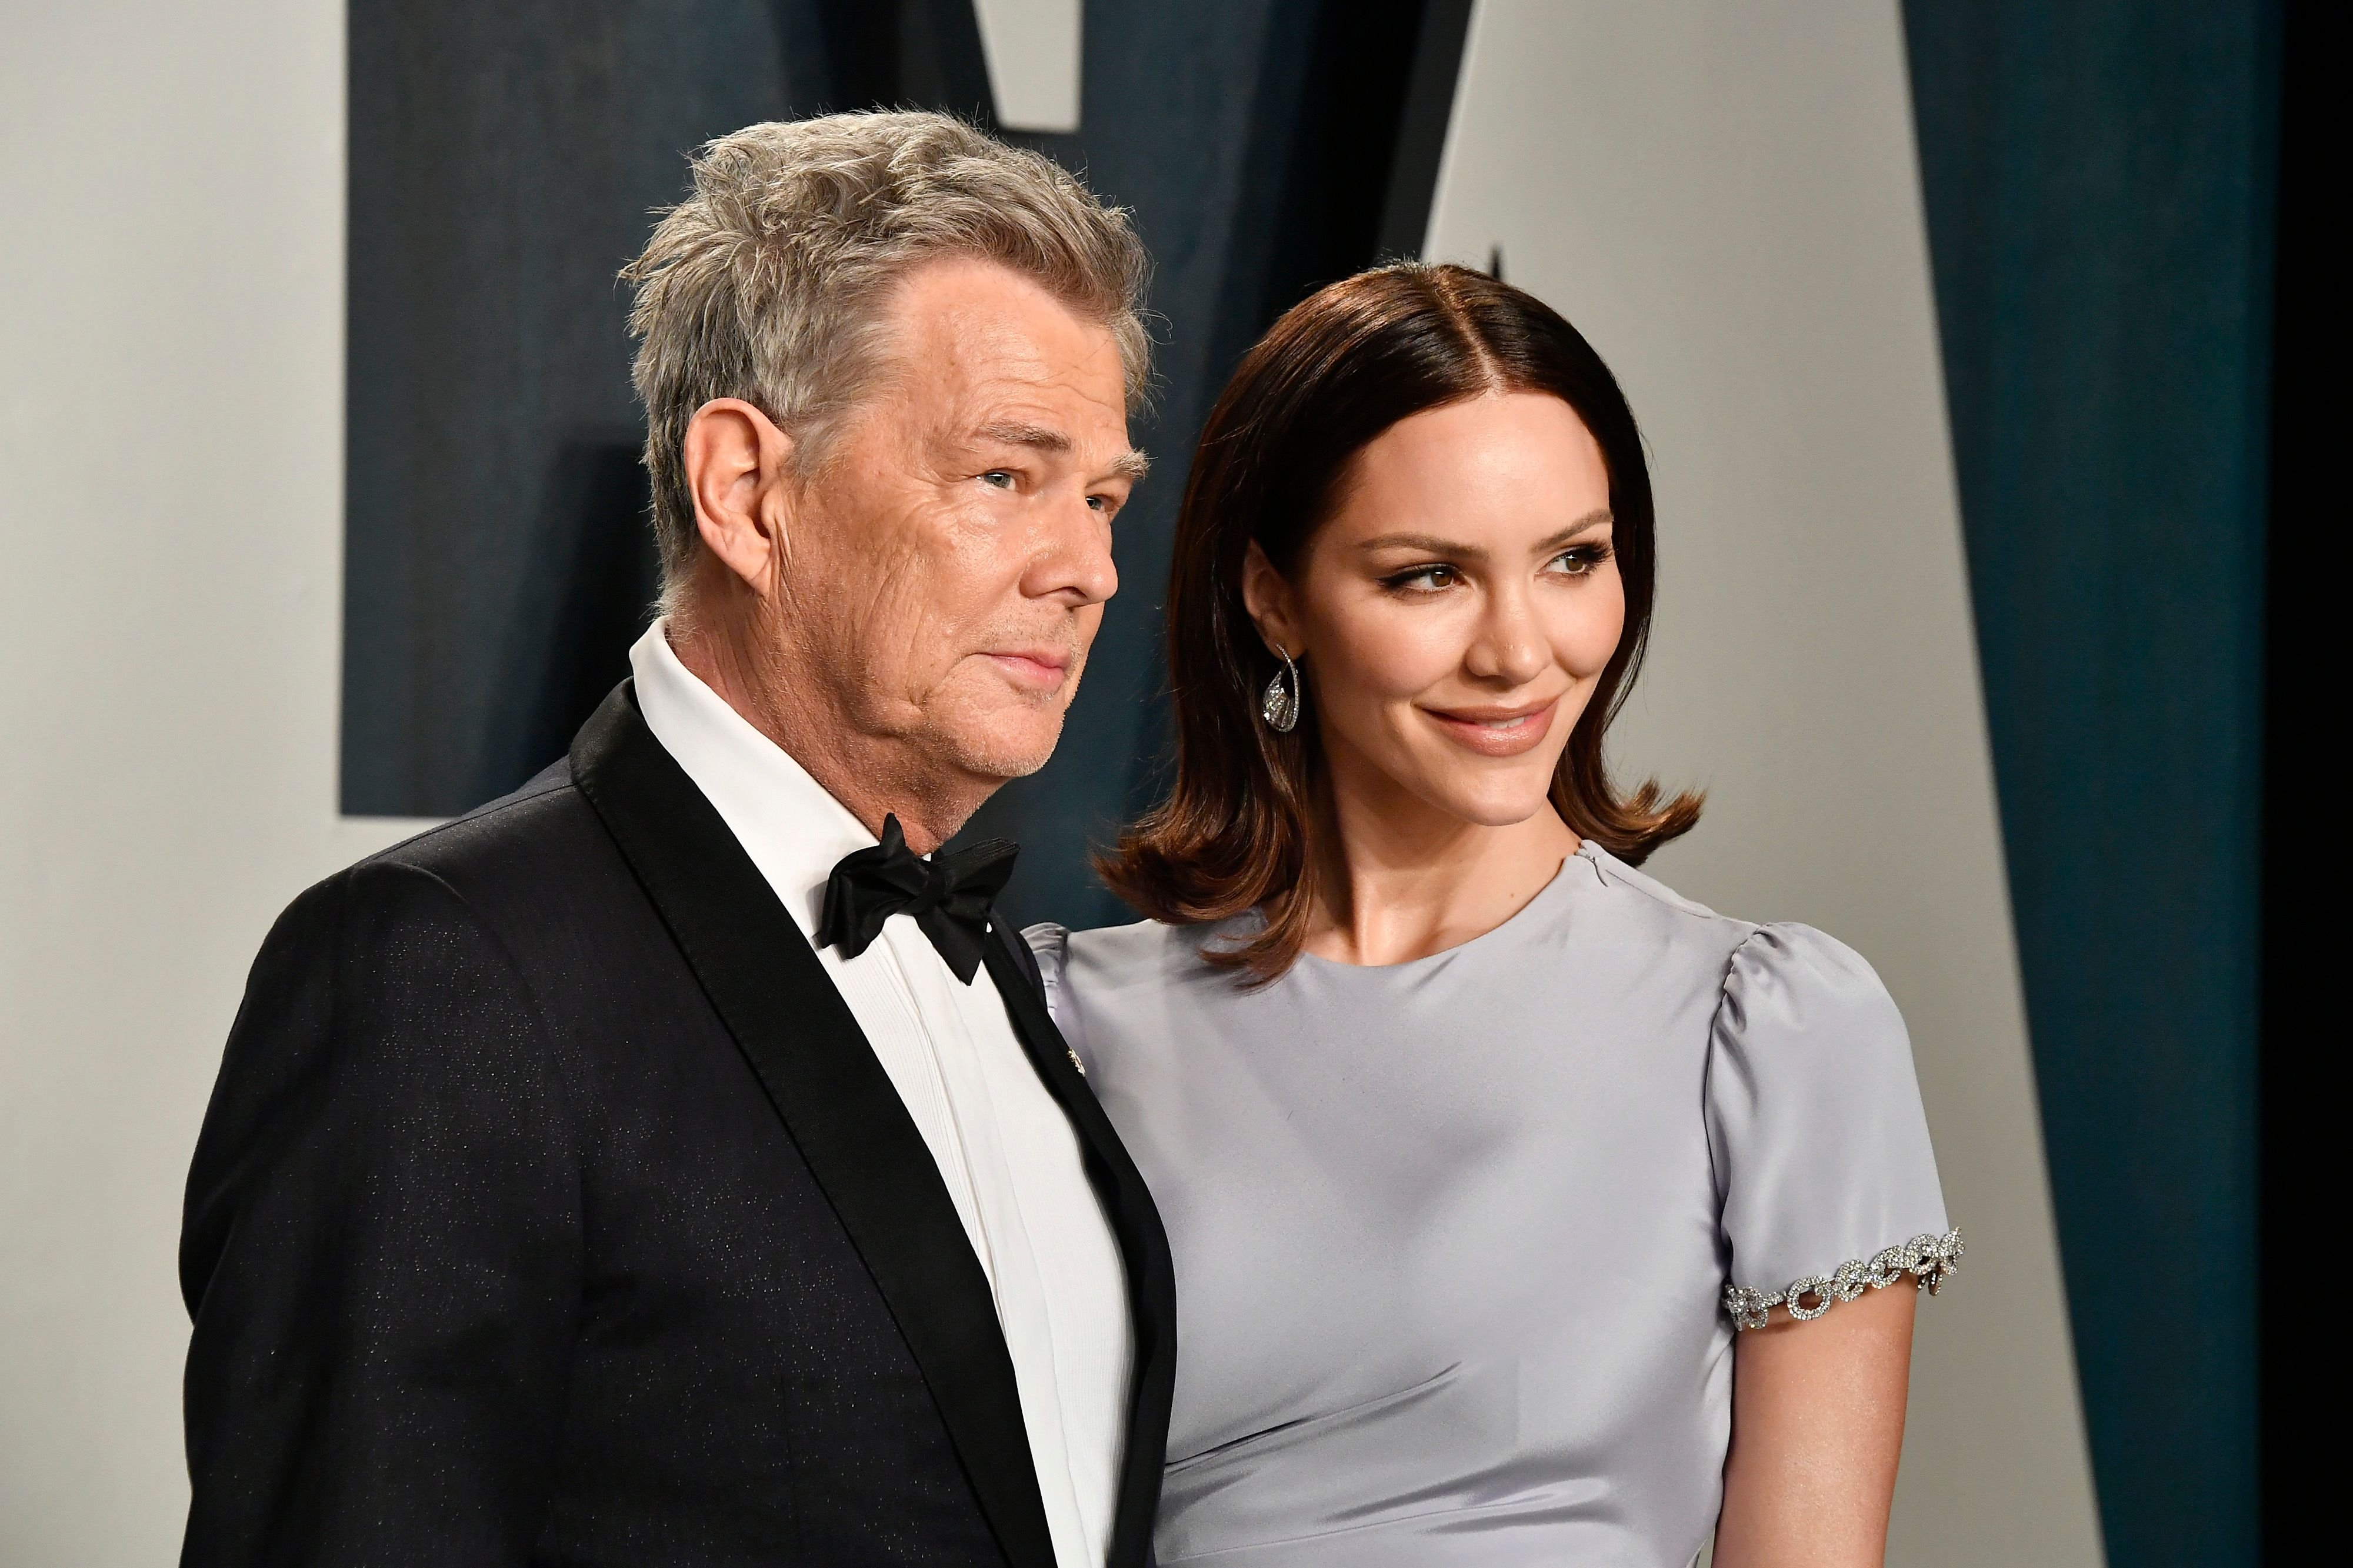 David Foster and Katharine McPhee at the 2020 Vanity Fair Oscar Party hosted by Radhika Jones at Wallis Annenberg Center for the Performing Arts on February 09, 2020 | Photo: Getty Images